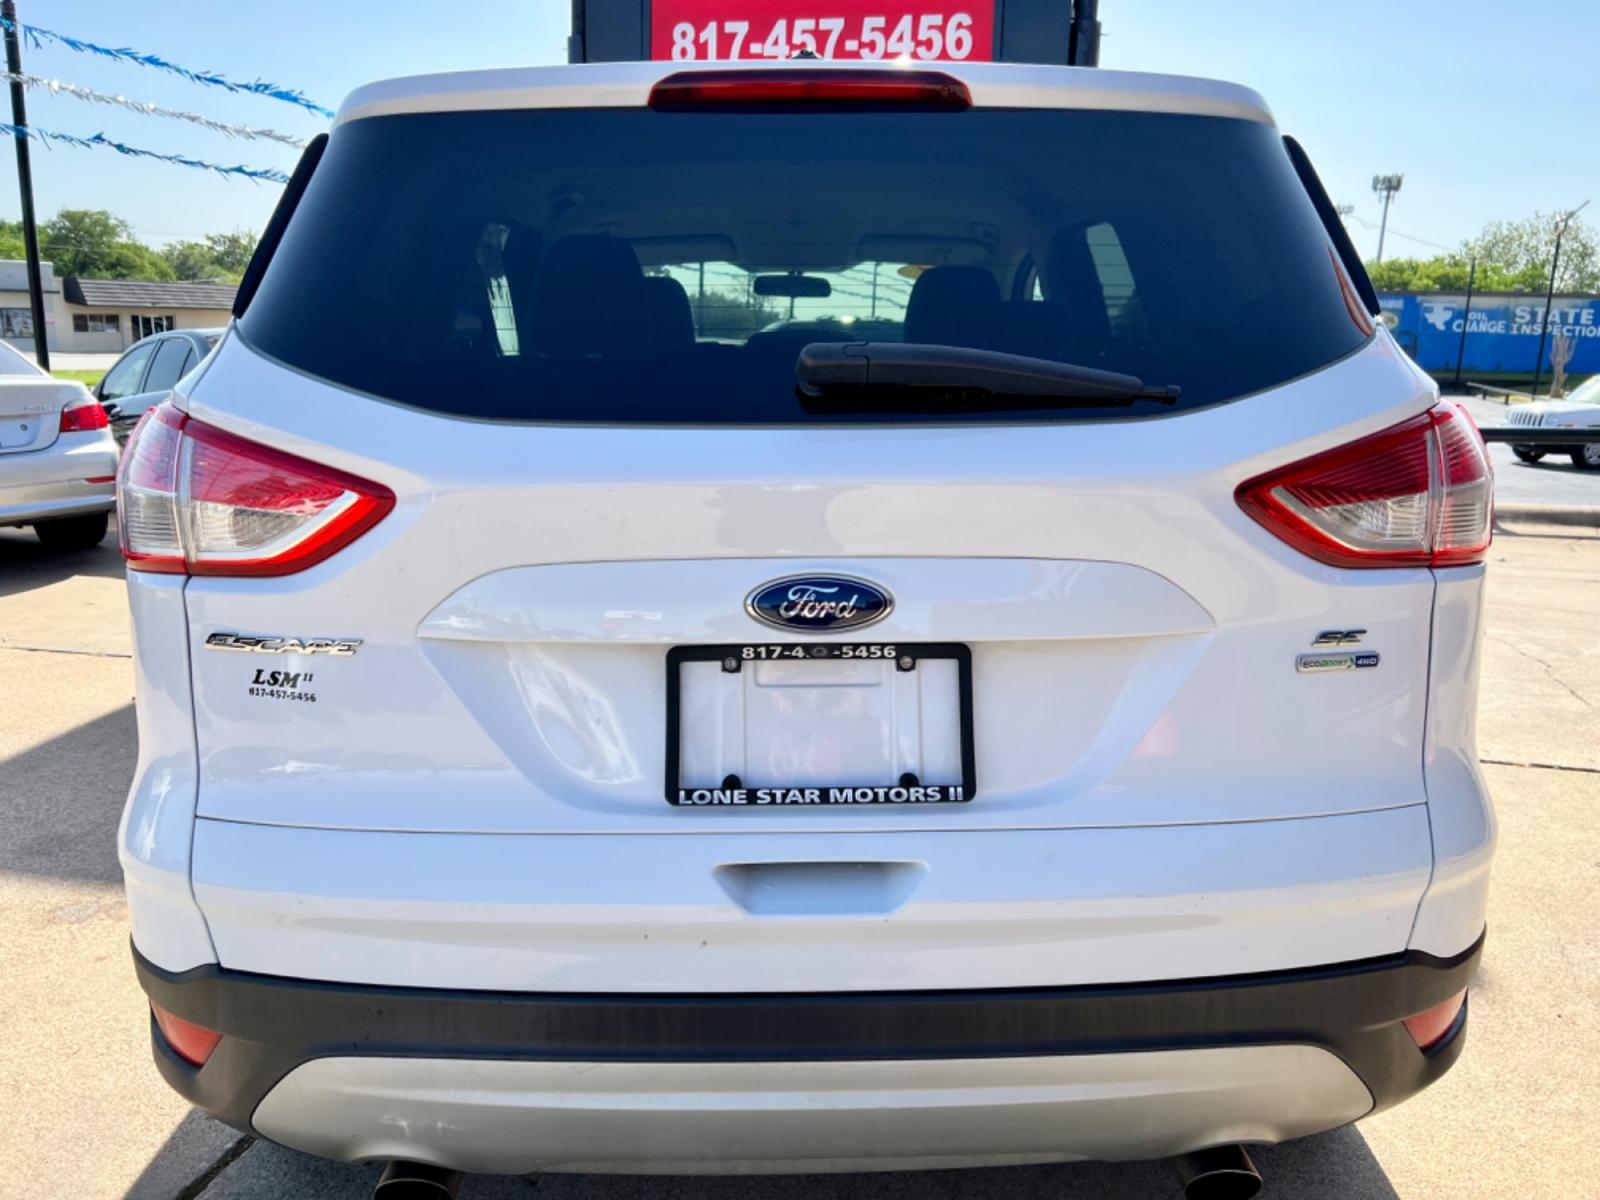 2014 WHITE FORD ESCAPE (1FMCU9GX7EU) , located at 5900 E. Lancaster Ave., Fort Worth, TX, 76112, (817) 457-5456, 0.000000, 0.000000 - This is a 2014 FORD ESCAPE SPORT UTILITY 4-DR that is in excellent condition. There are no dents or scratches. The interior is clean with no rips or tears or stains. All power windows, door locks and seats. Ice cold AC for those hot Texas summer days. It is equipped with a CD player, AM/FM radio, AU - Photo #4